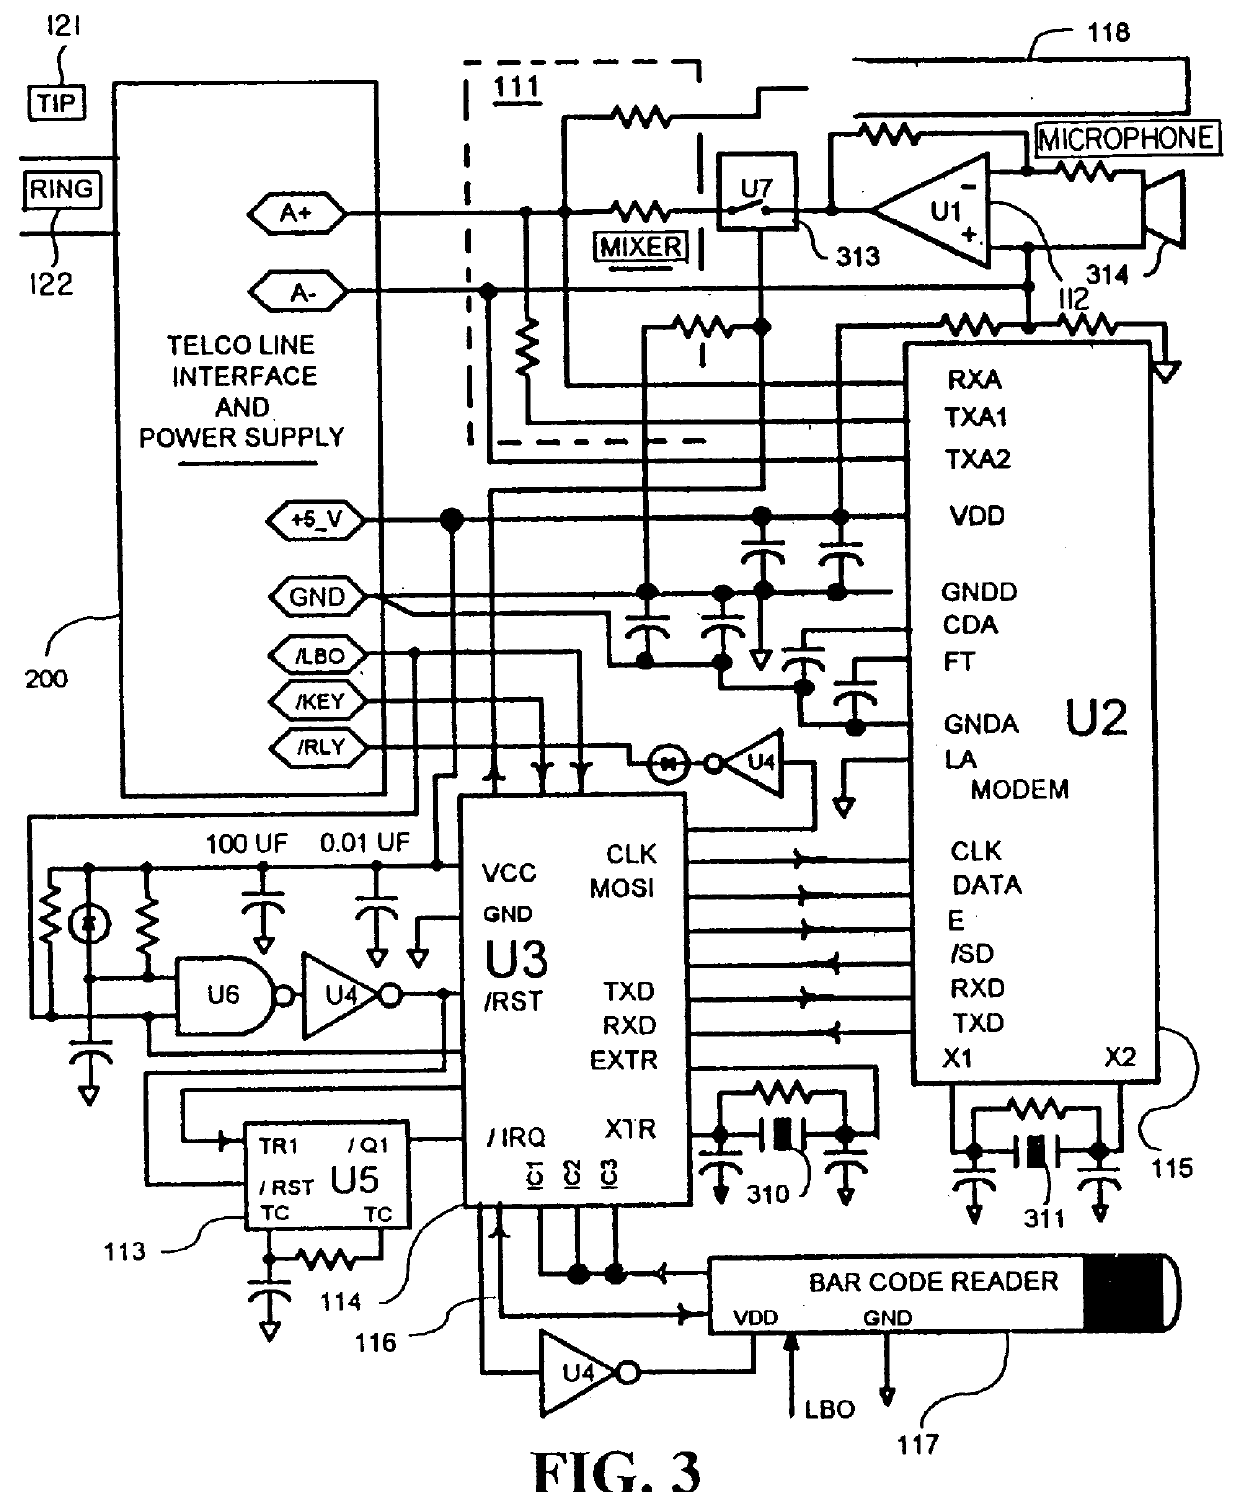 Low power telecommunication controller for a host computer server